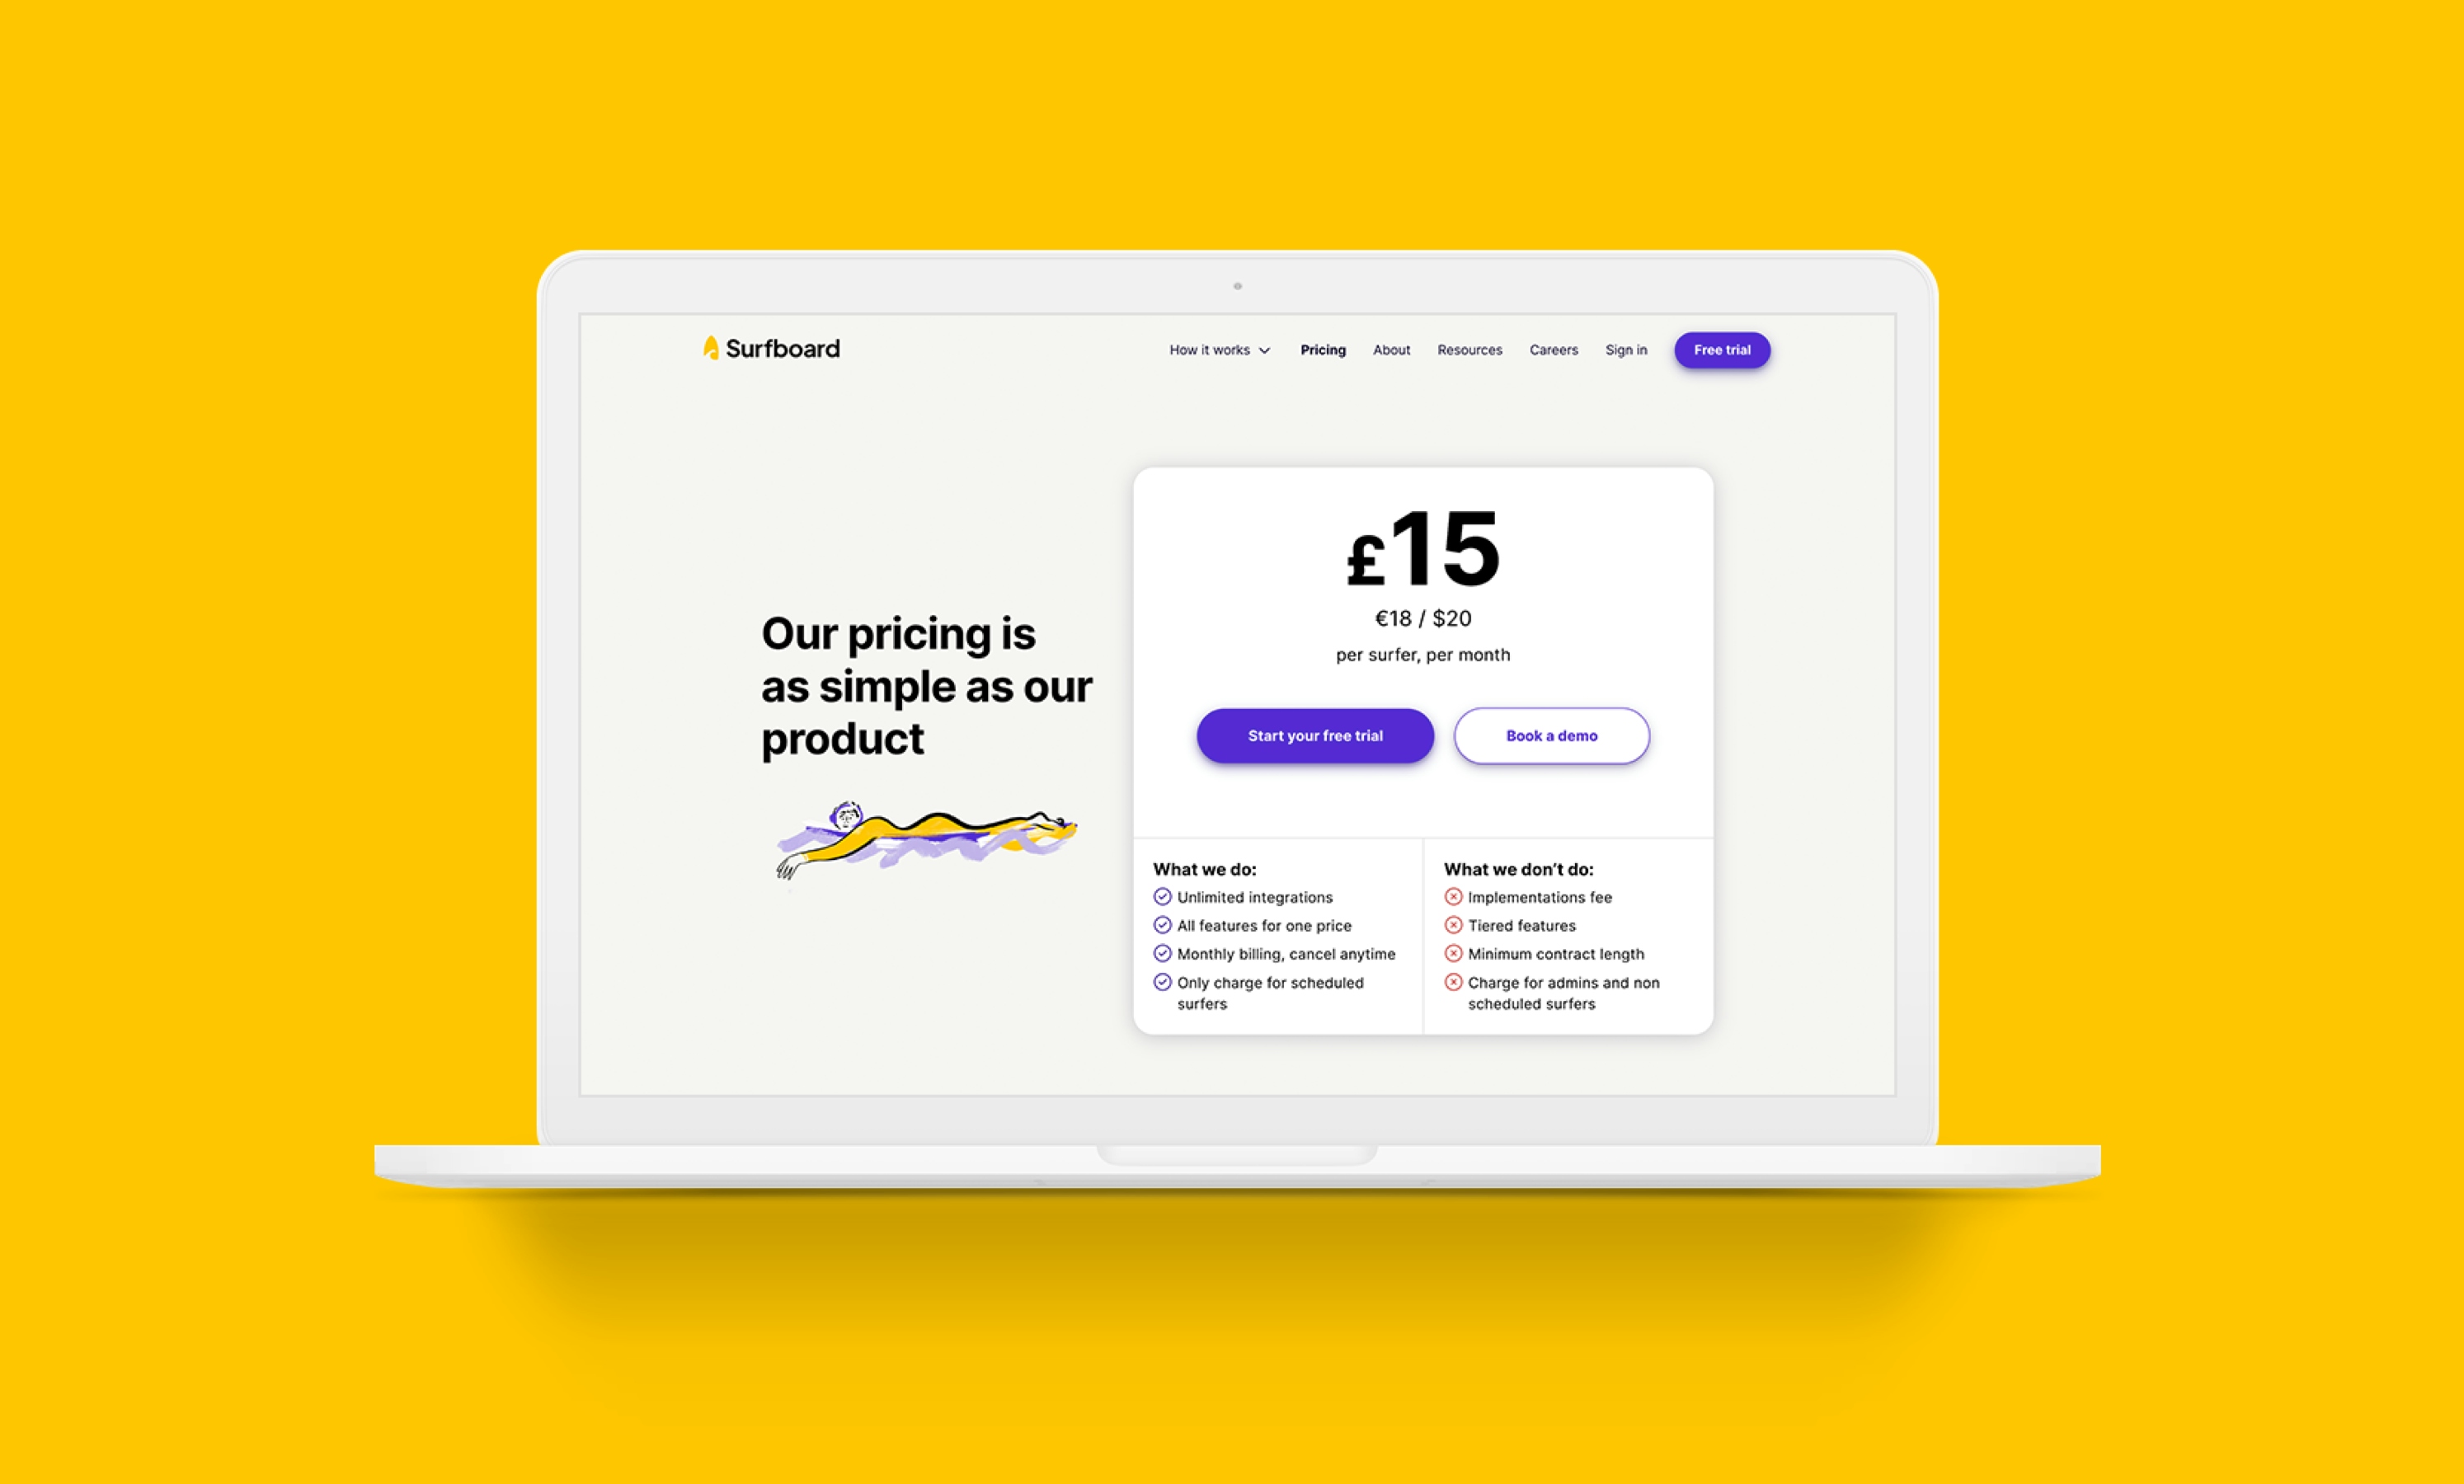 A desktop sits on a yellow background “Our pricing is as simple as our Product” with a surfer paddling on a board with price structures and call to actions state “Start free trial” and “Book a demo”